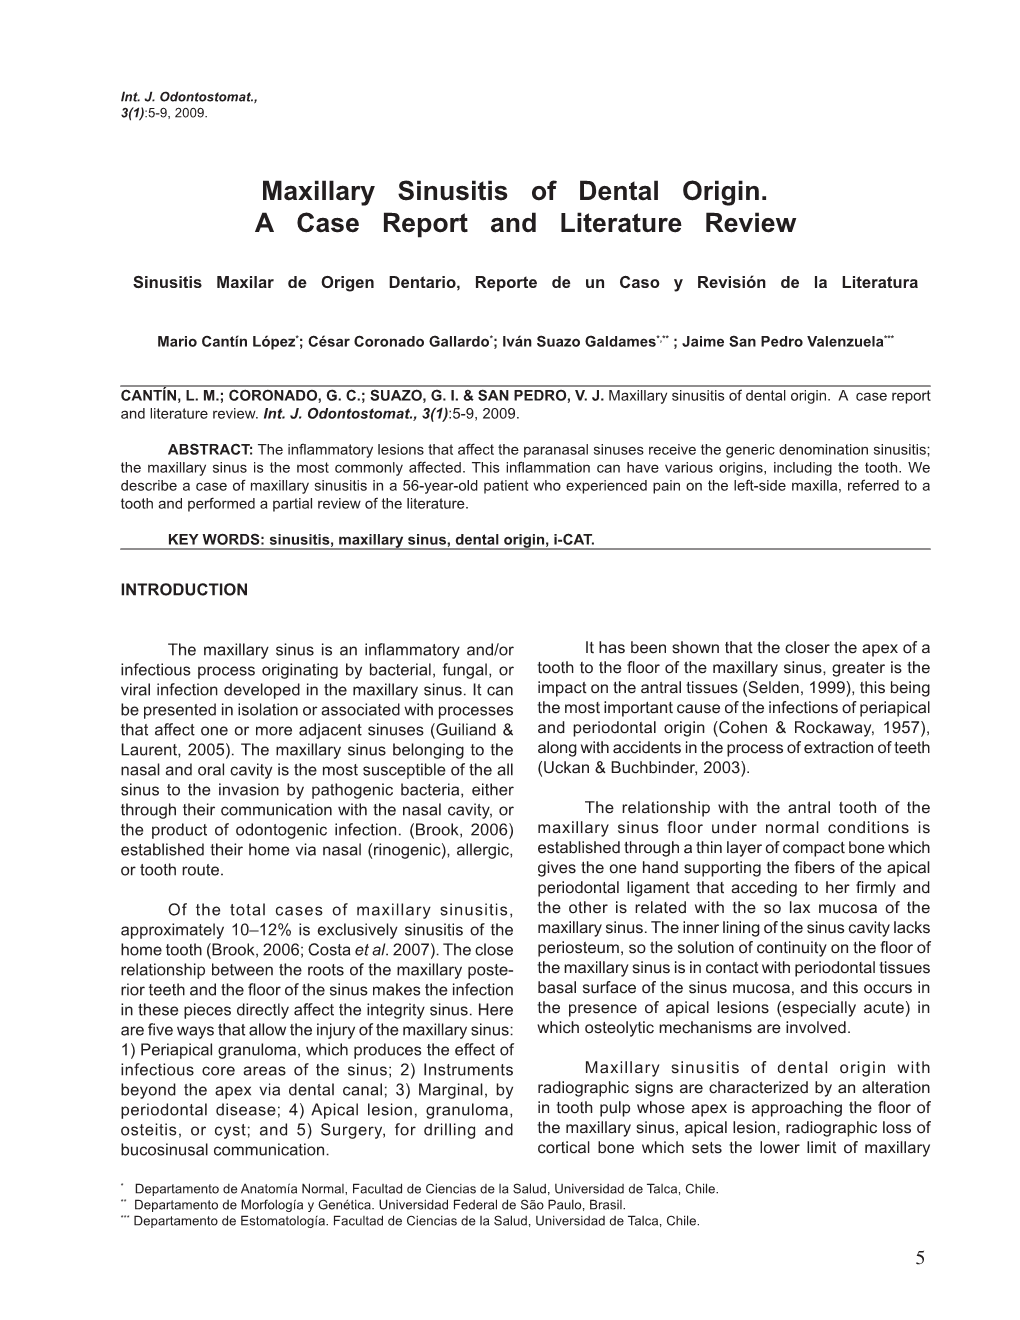 Maxillary Sinusitis of Dental Origin. a Case Report and Literature Review